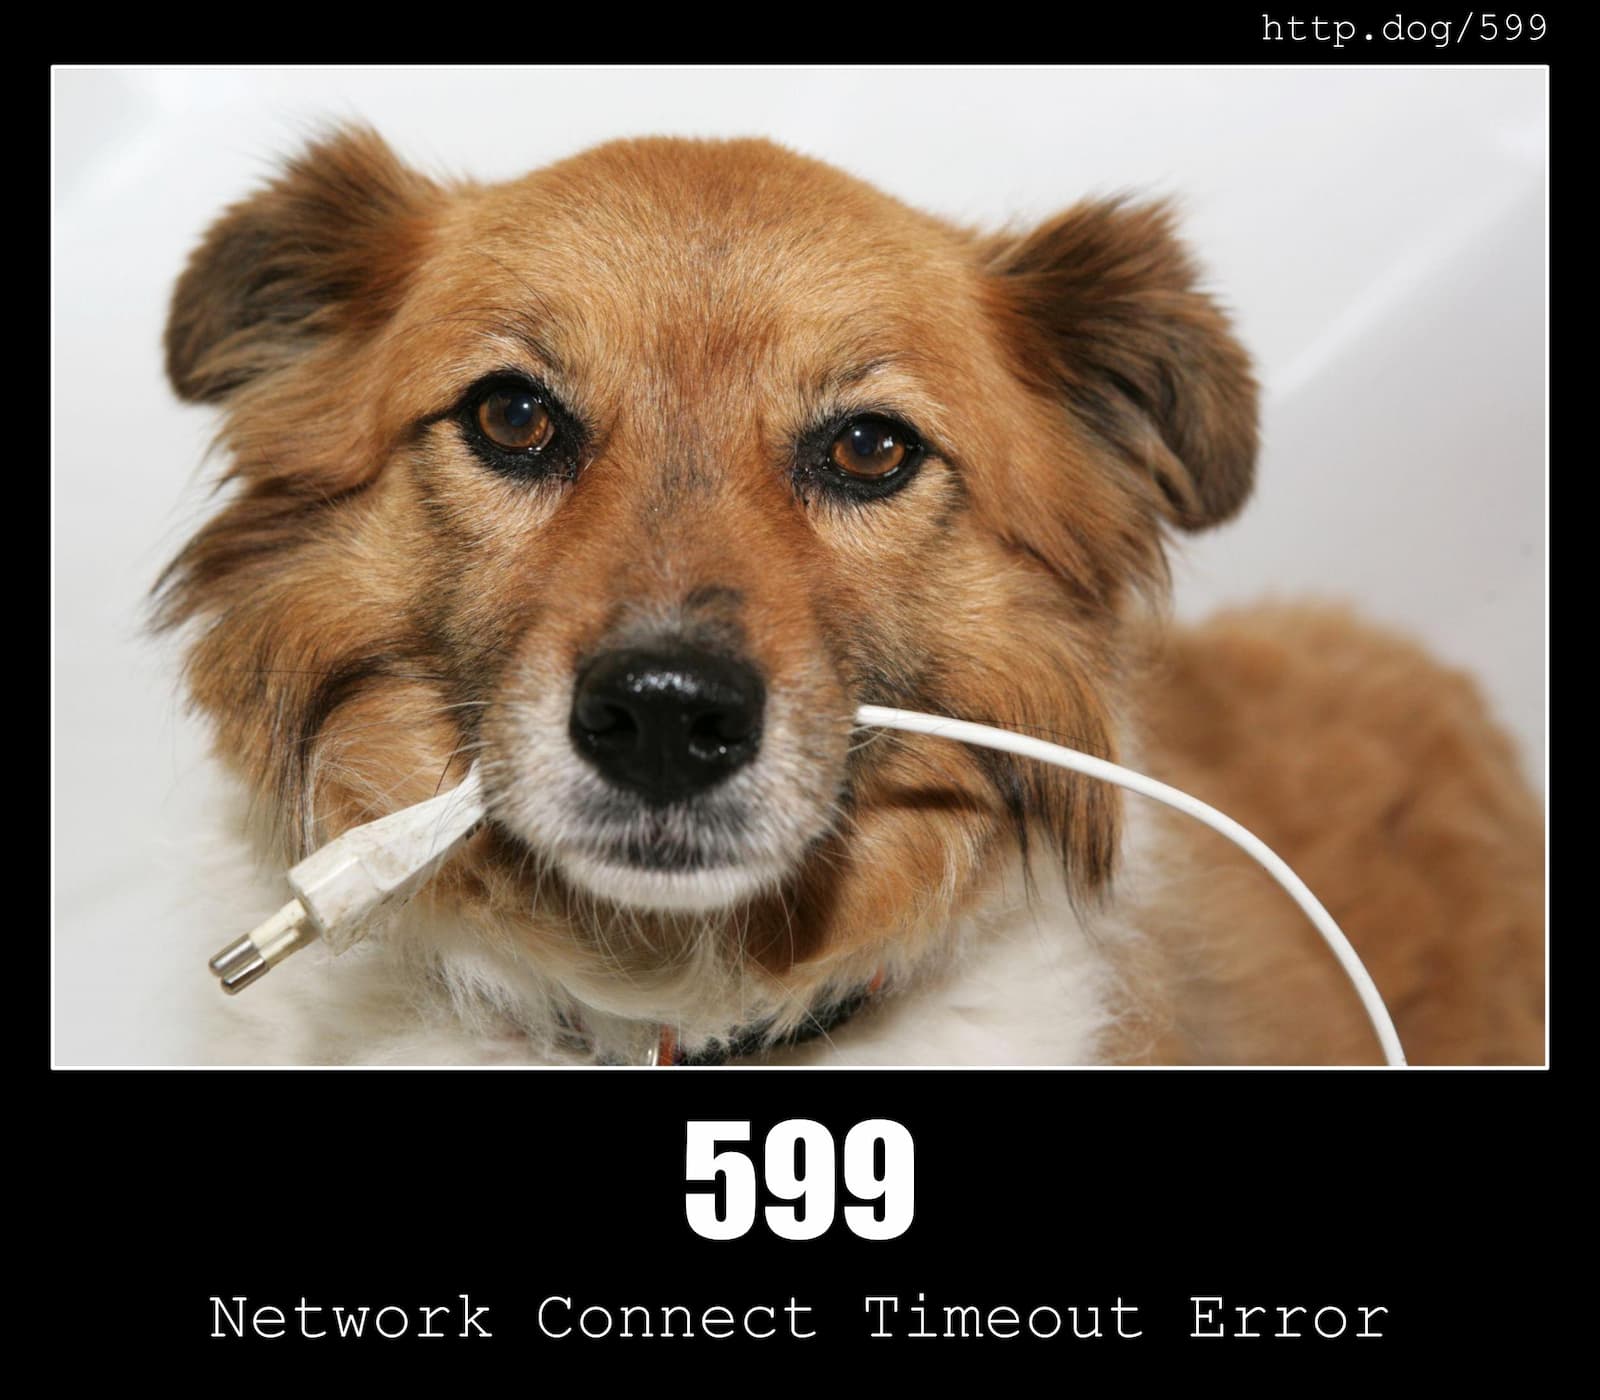 HTTP Status Code 599 Network Connect Timeout Error & Dogs